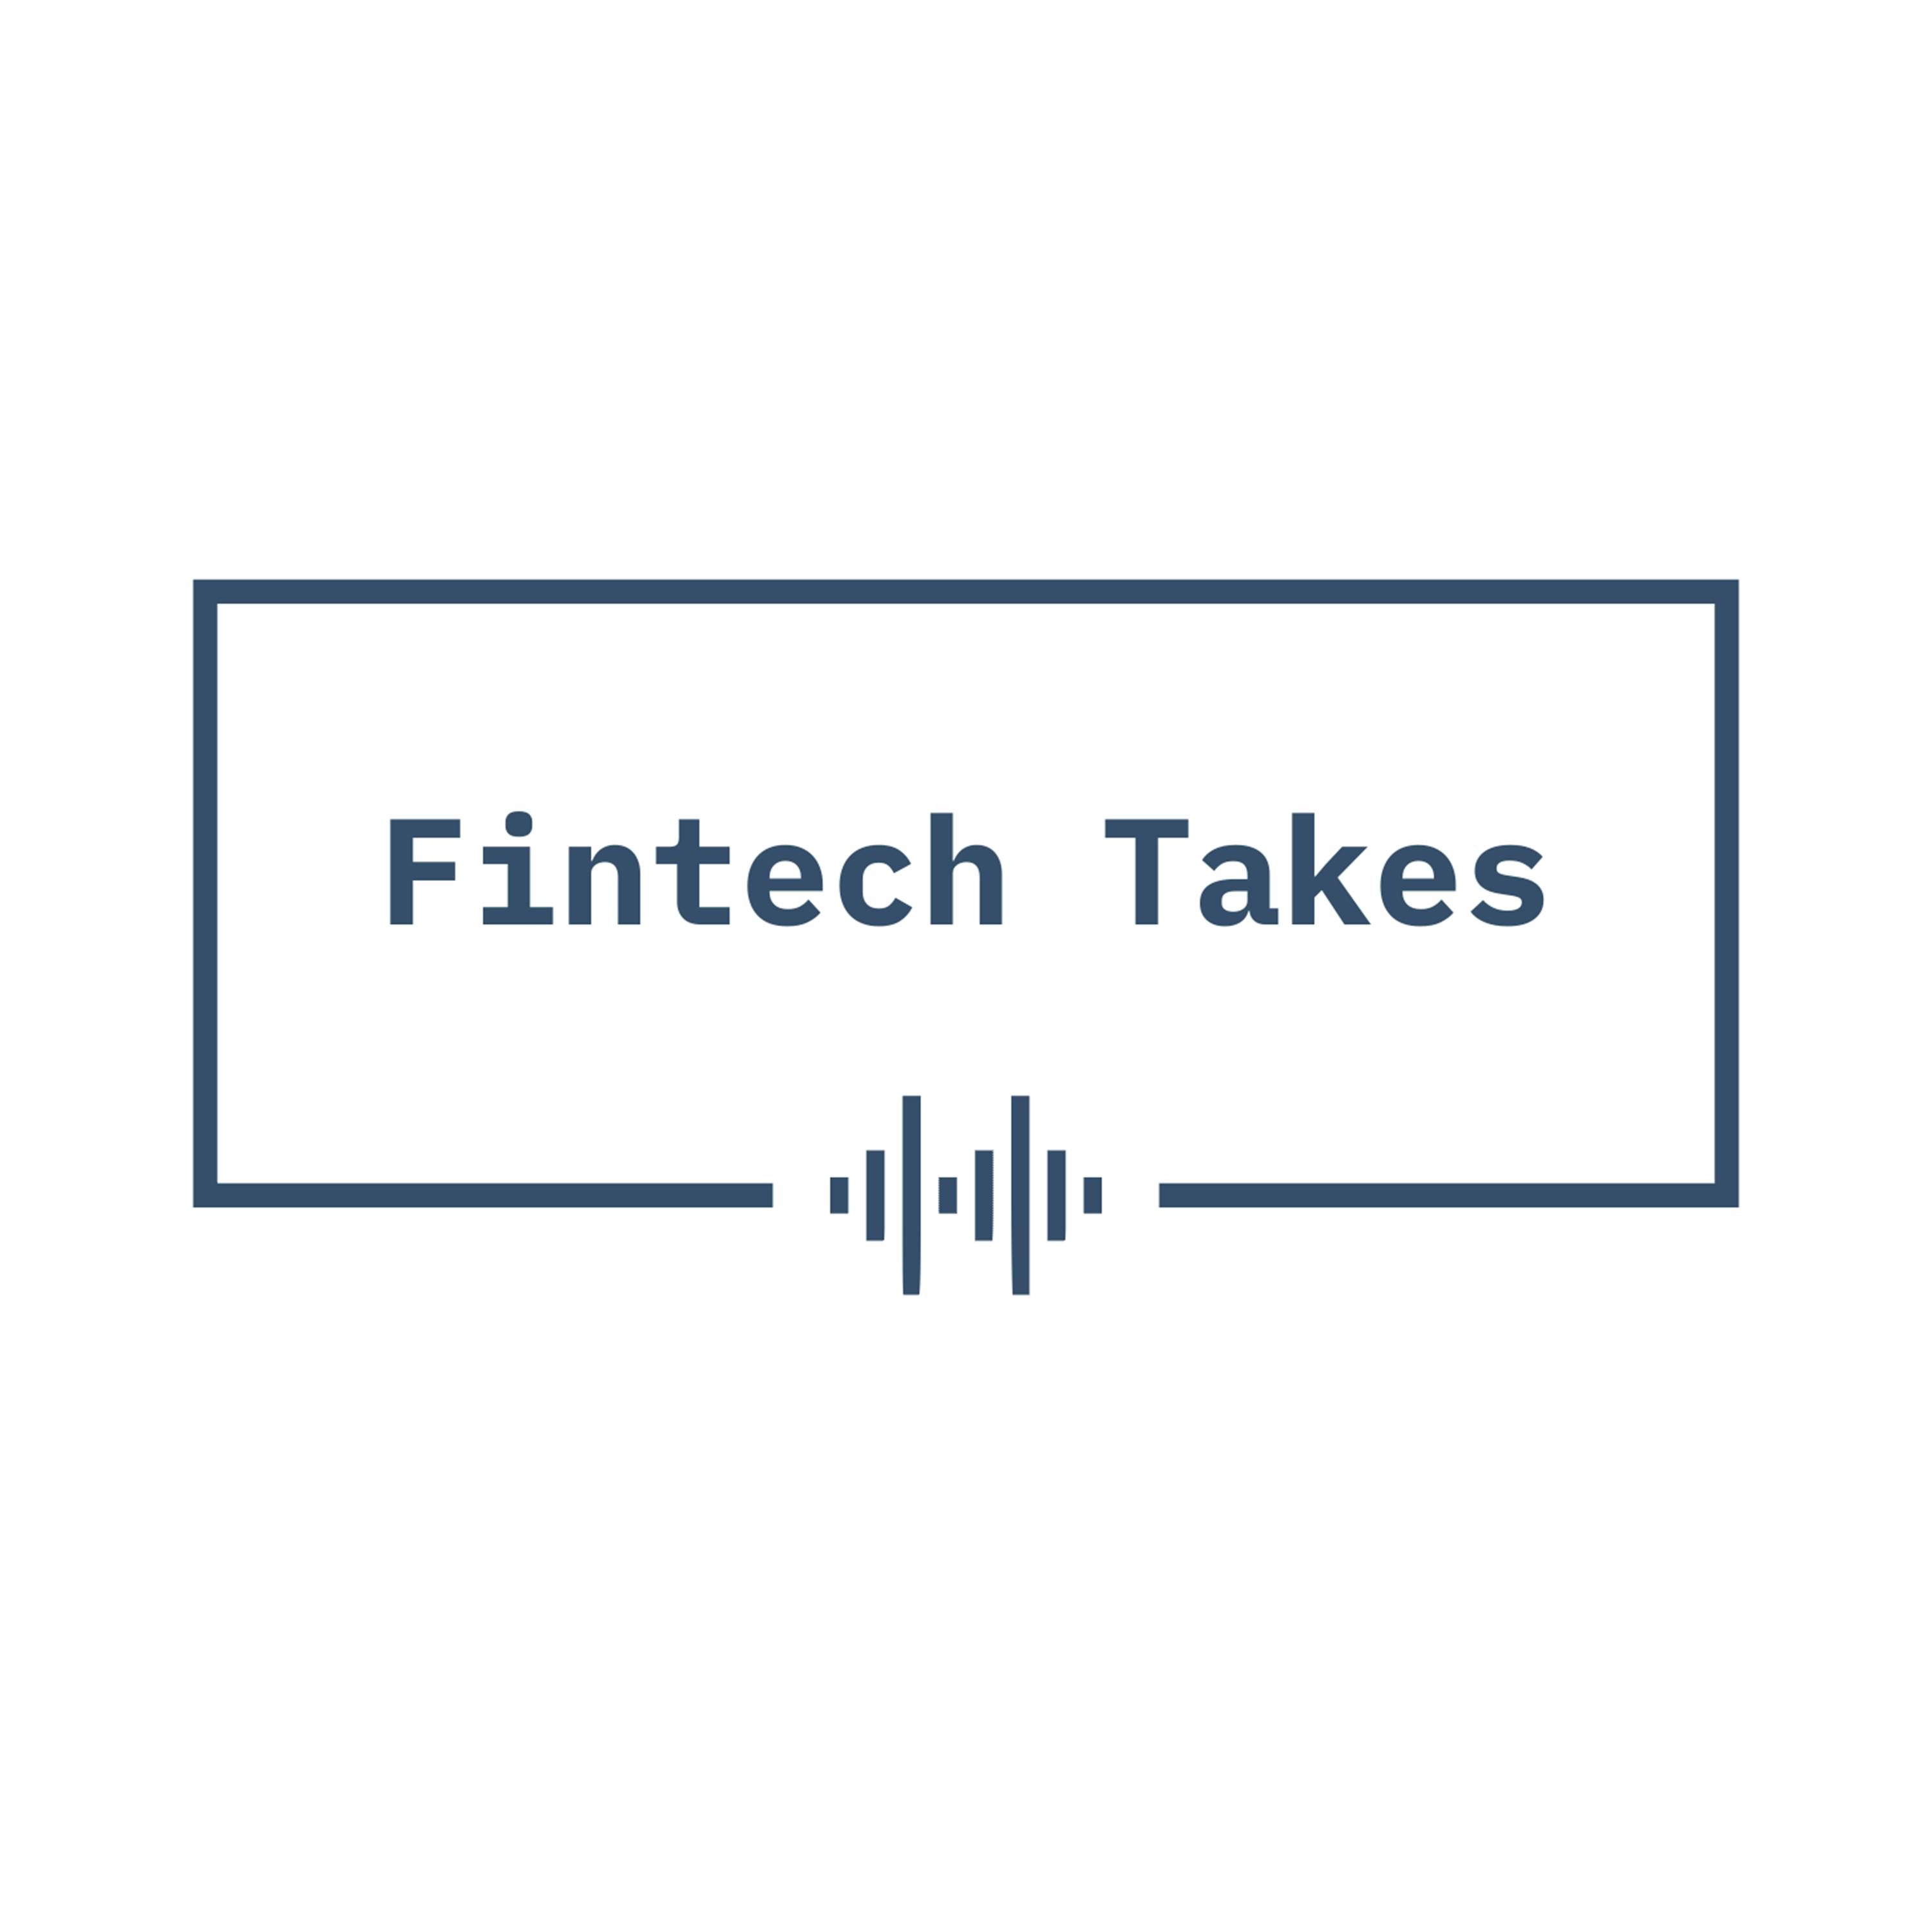 S2 Ep7: BNC: Global Chip Shortage, ModernFi, and FIS’ acquisition of Worldpay